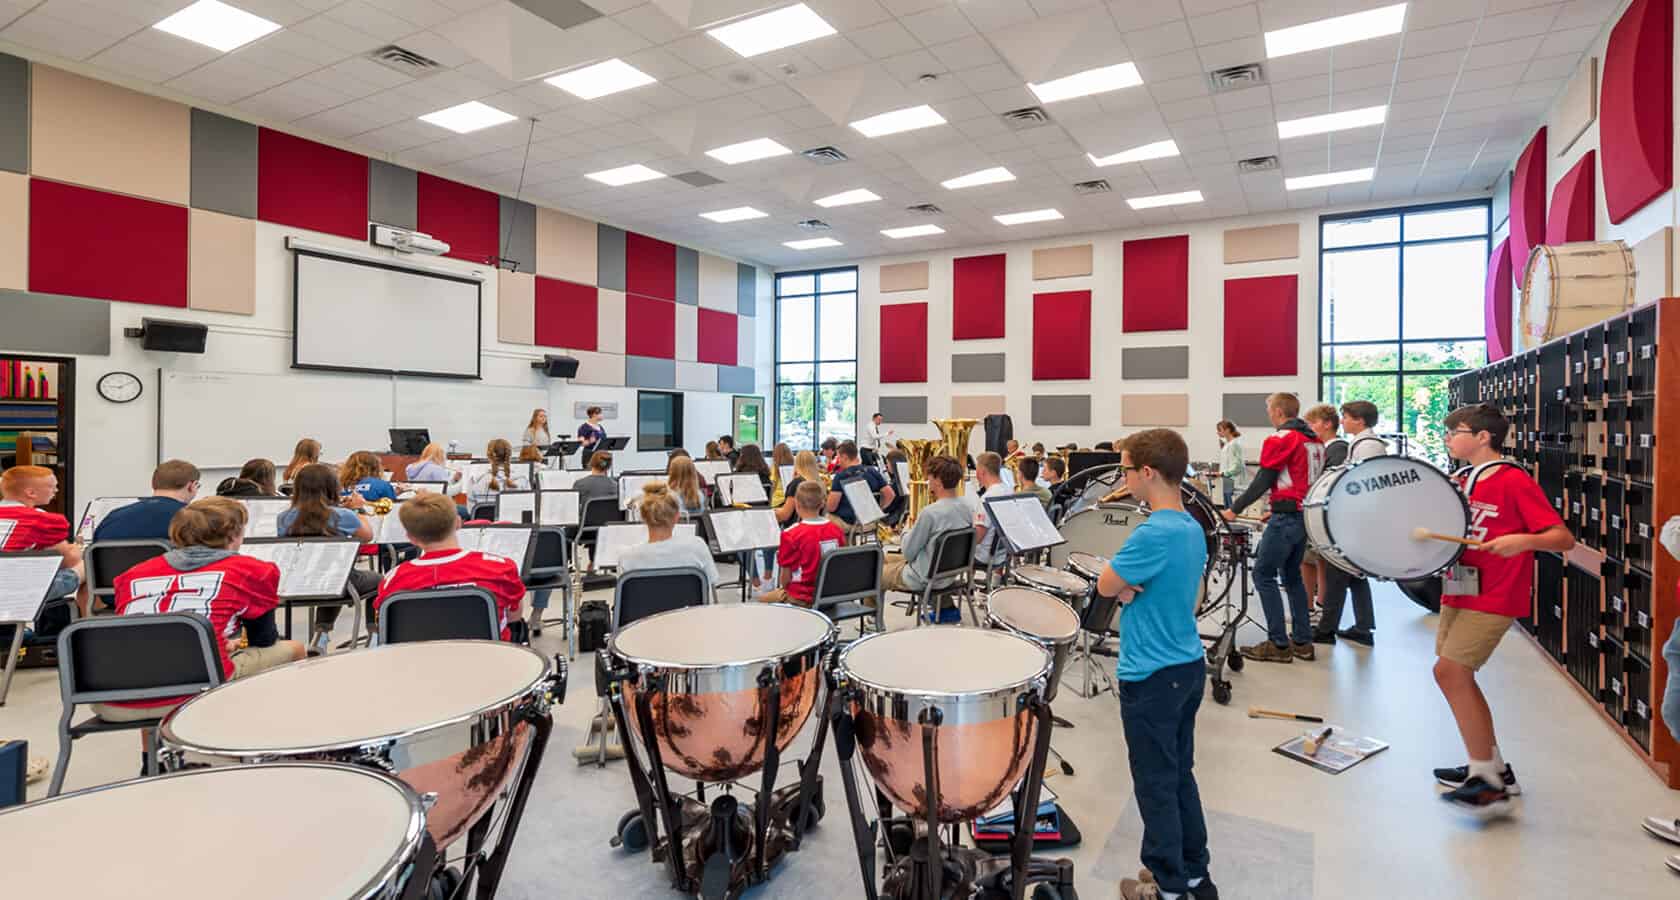 students in band classroom